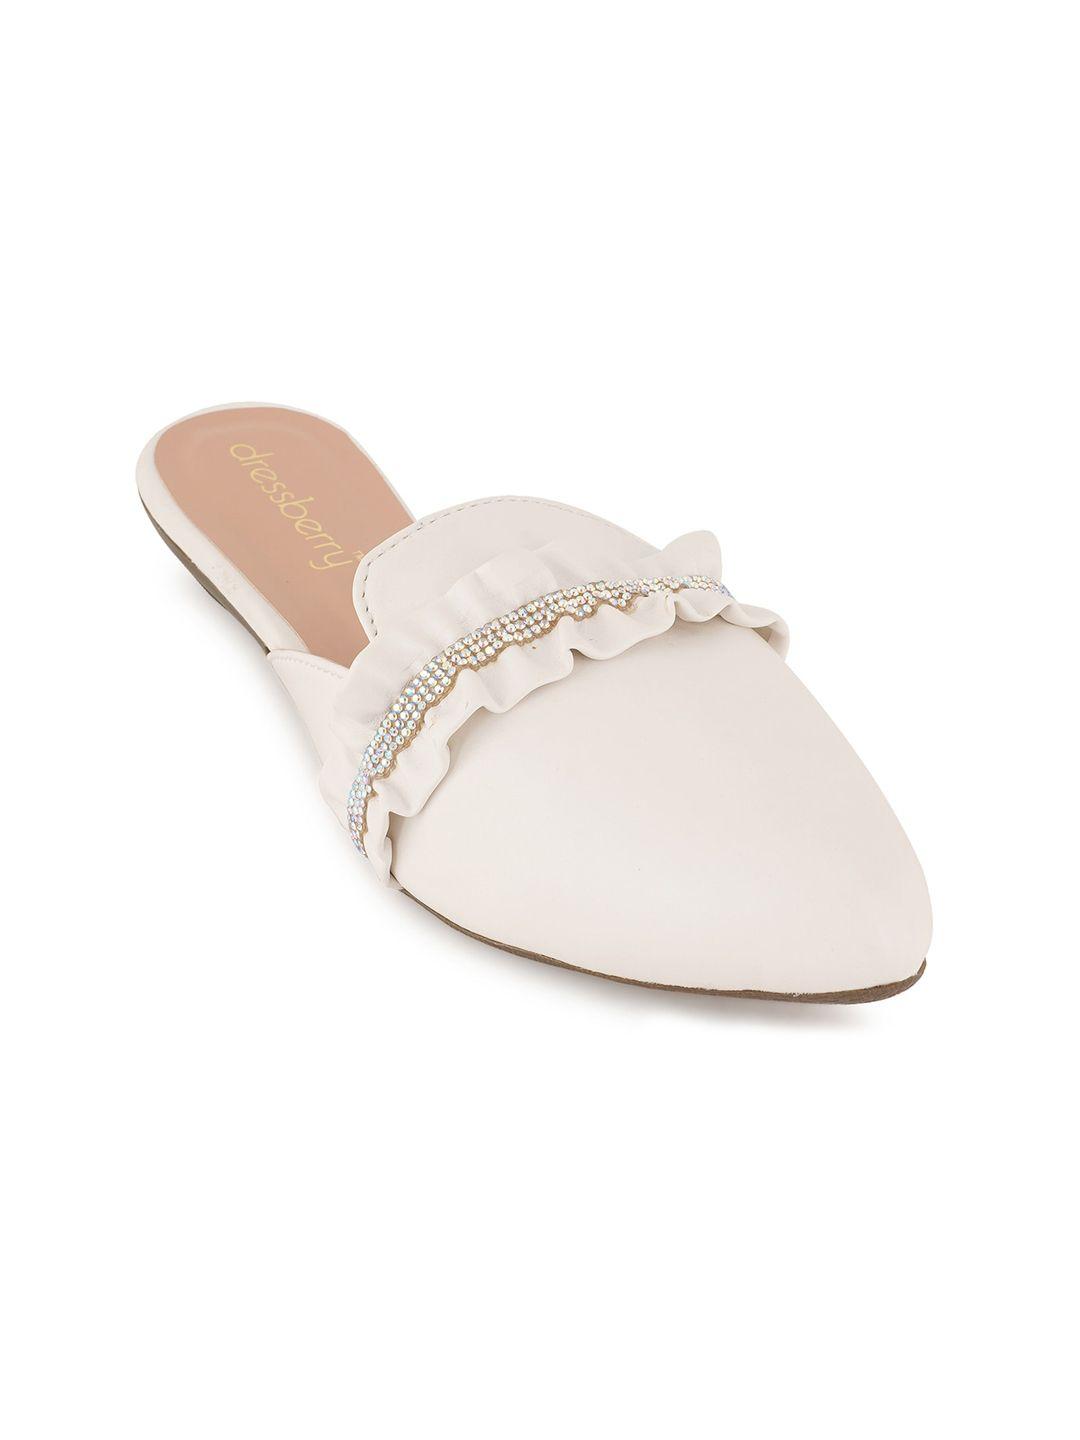 dressberry embellished pointed toe mules